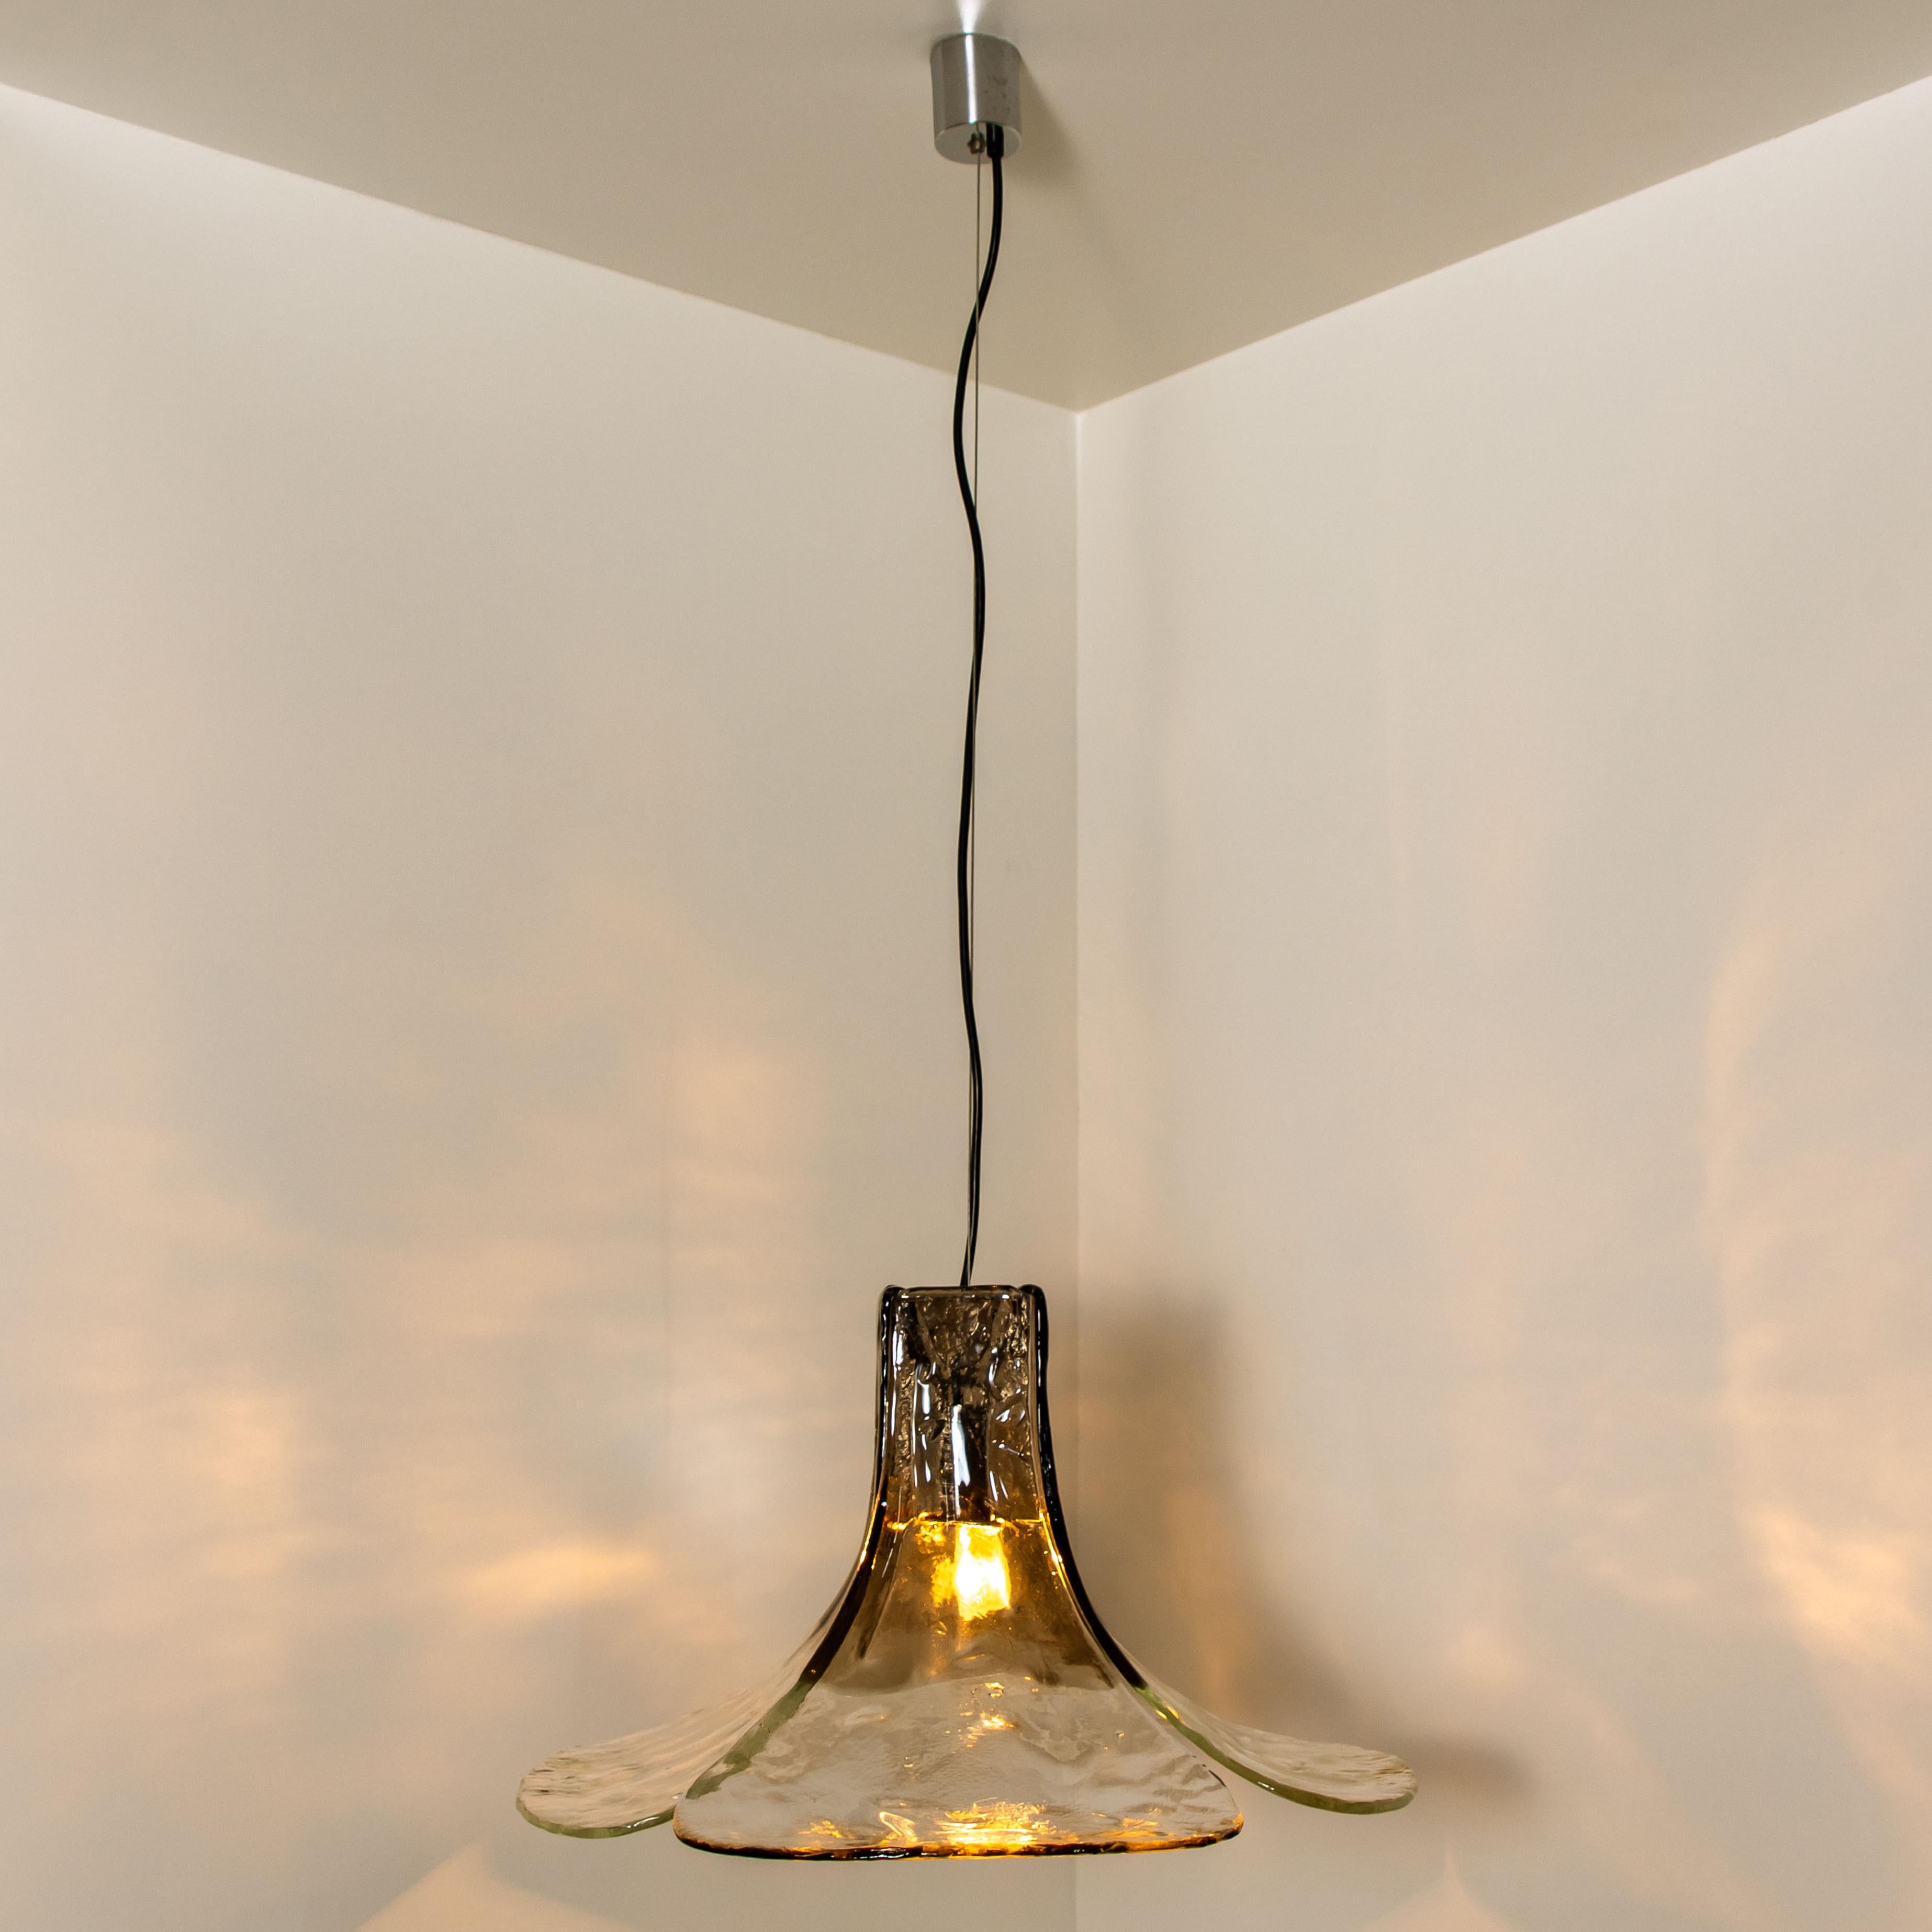 Glass 1 of the 2 Pendant Lamps by Carlo Nason for Mazzega